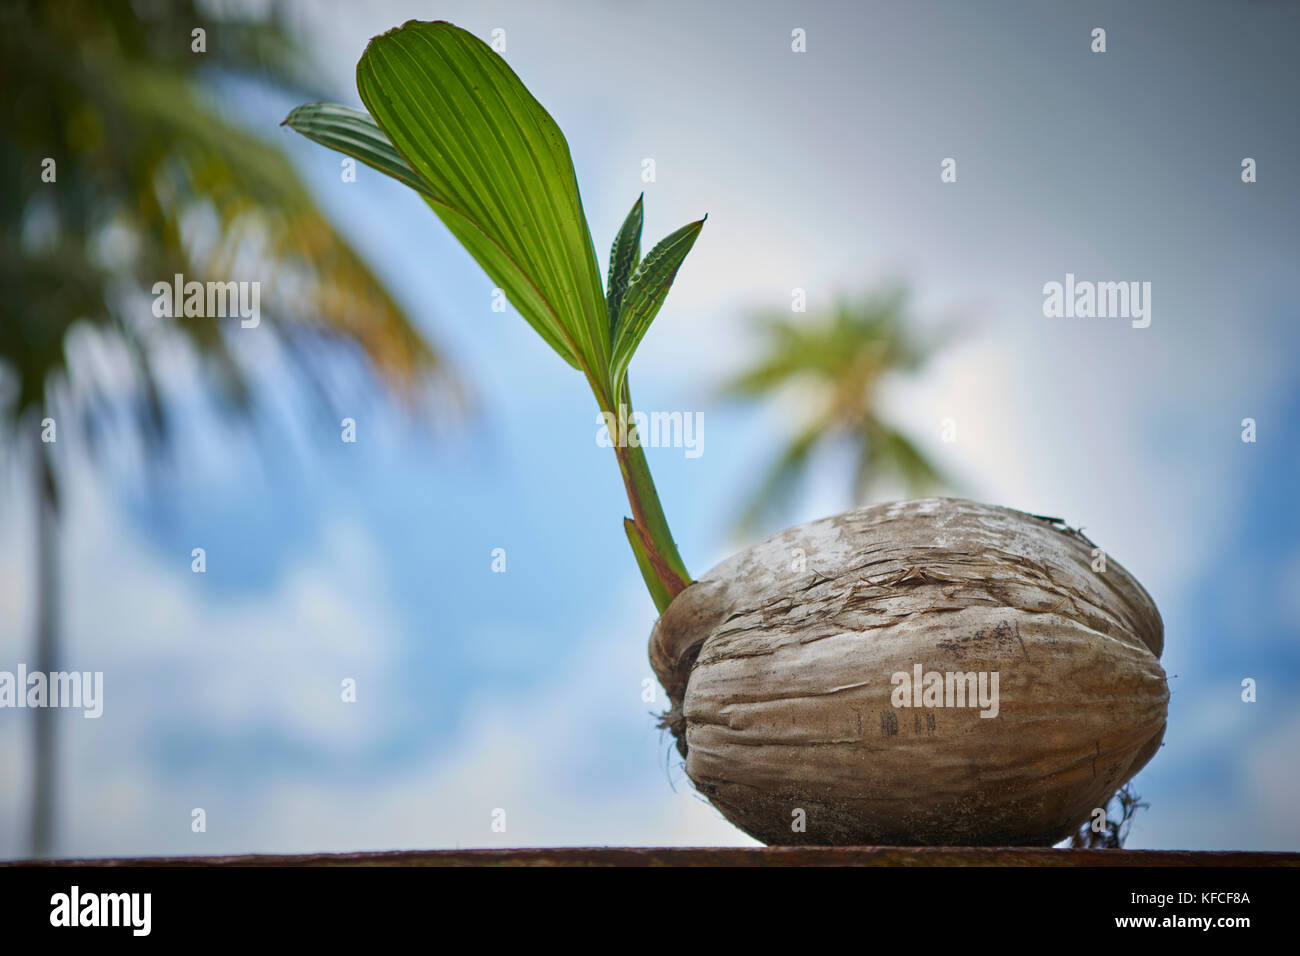 Coconut with a new shoot emerging. Stock Photo